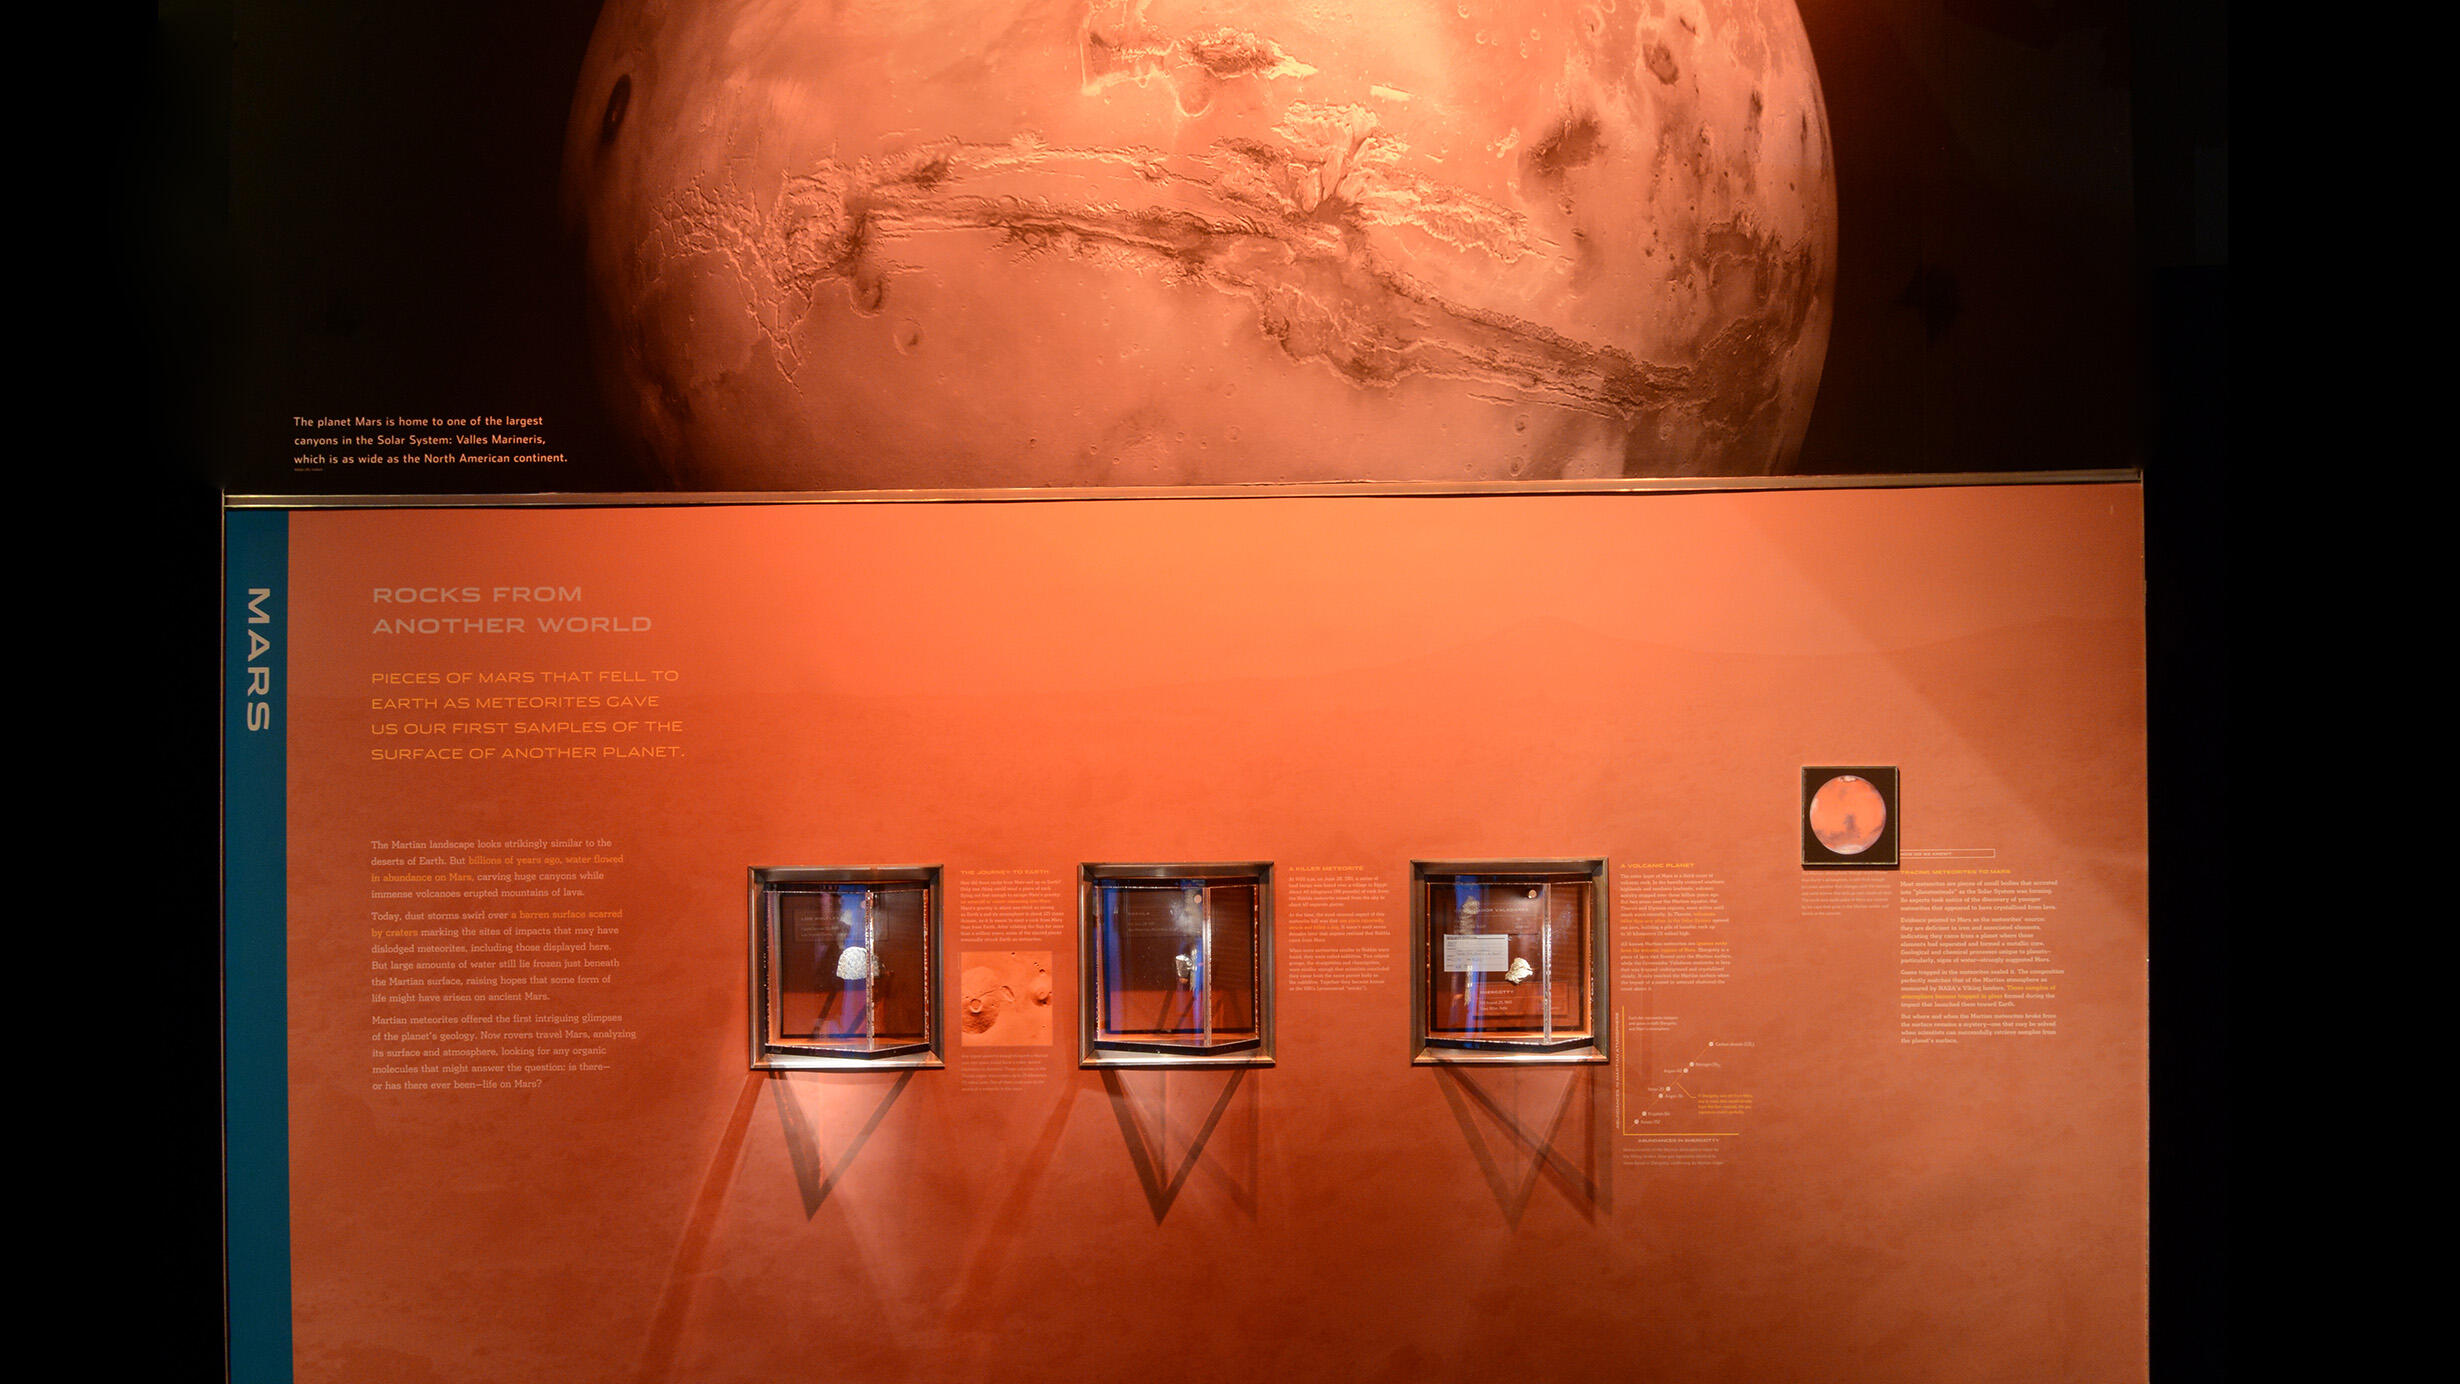 Mars section in the Hall of Meteorites, showing three meteorites, text and images.